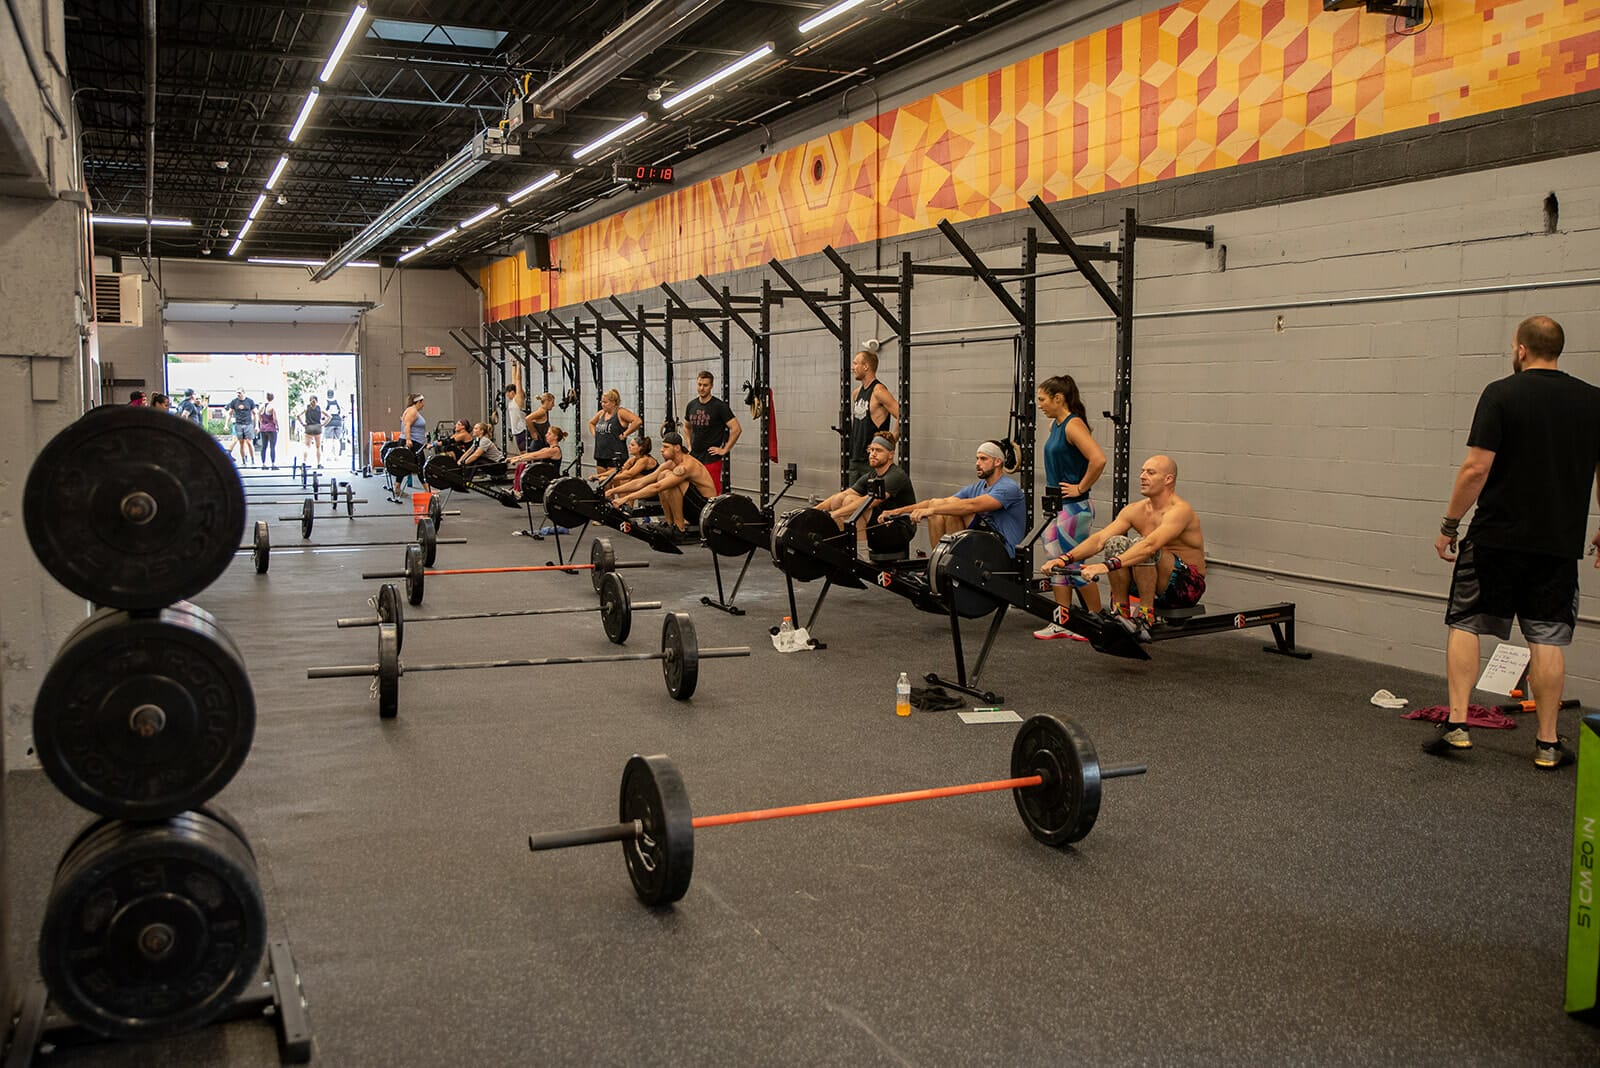 CrossFit Arsenal - The Best Gym Near Me In Watertown